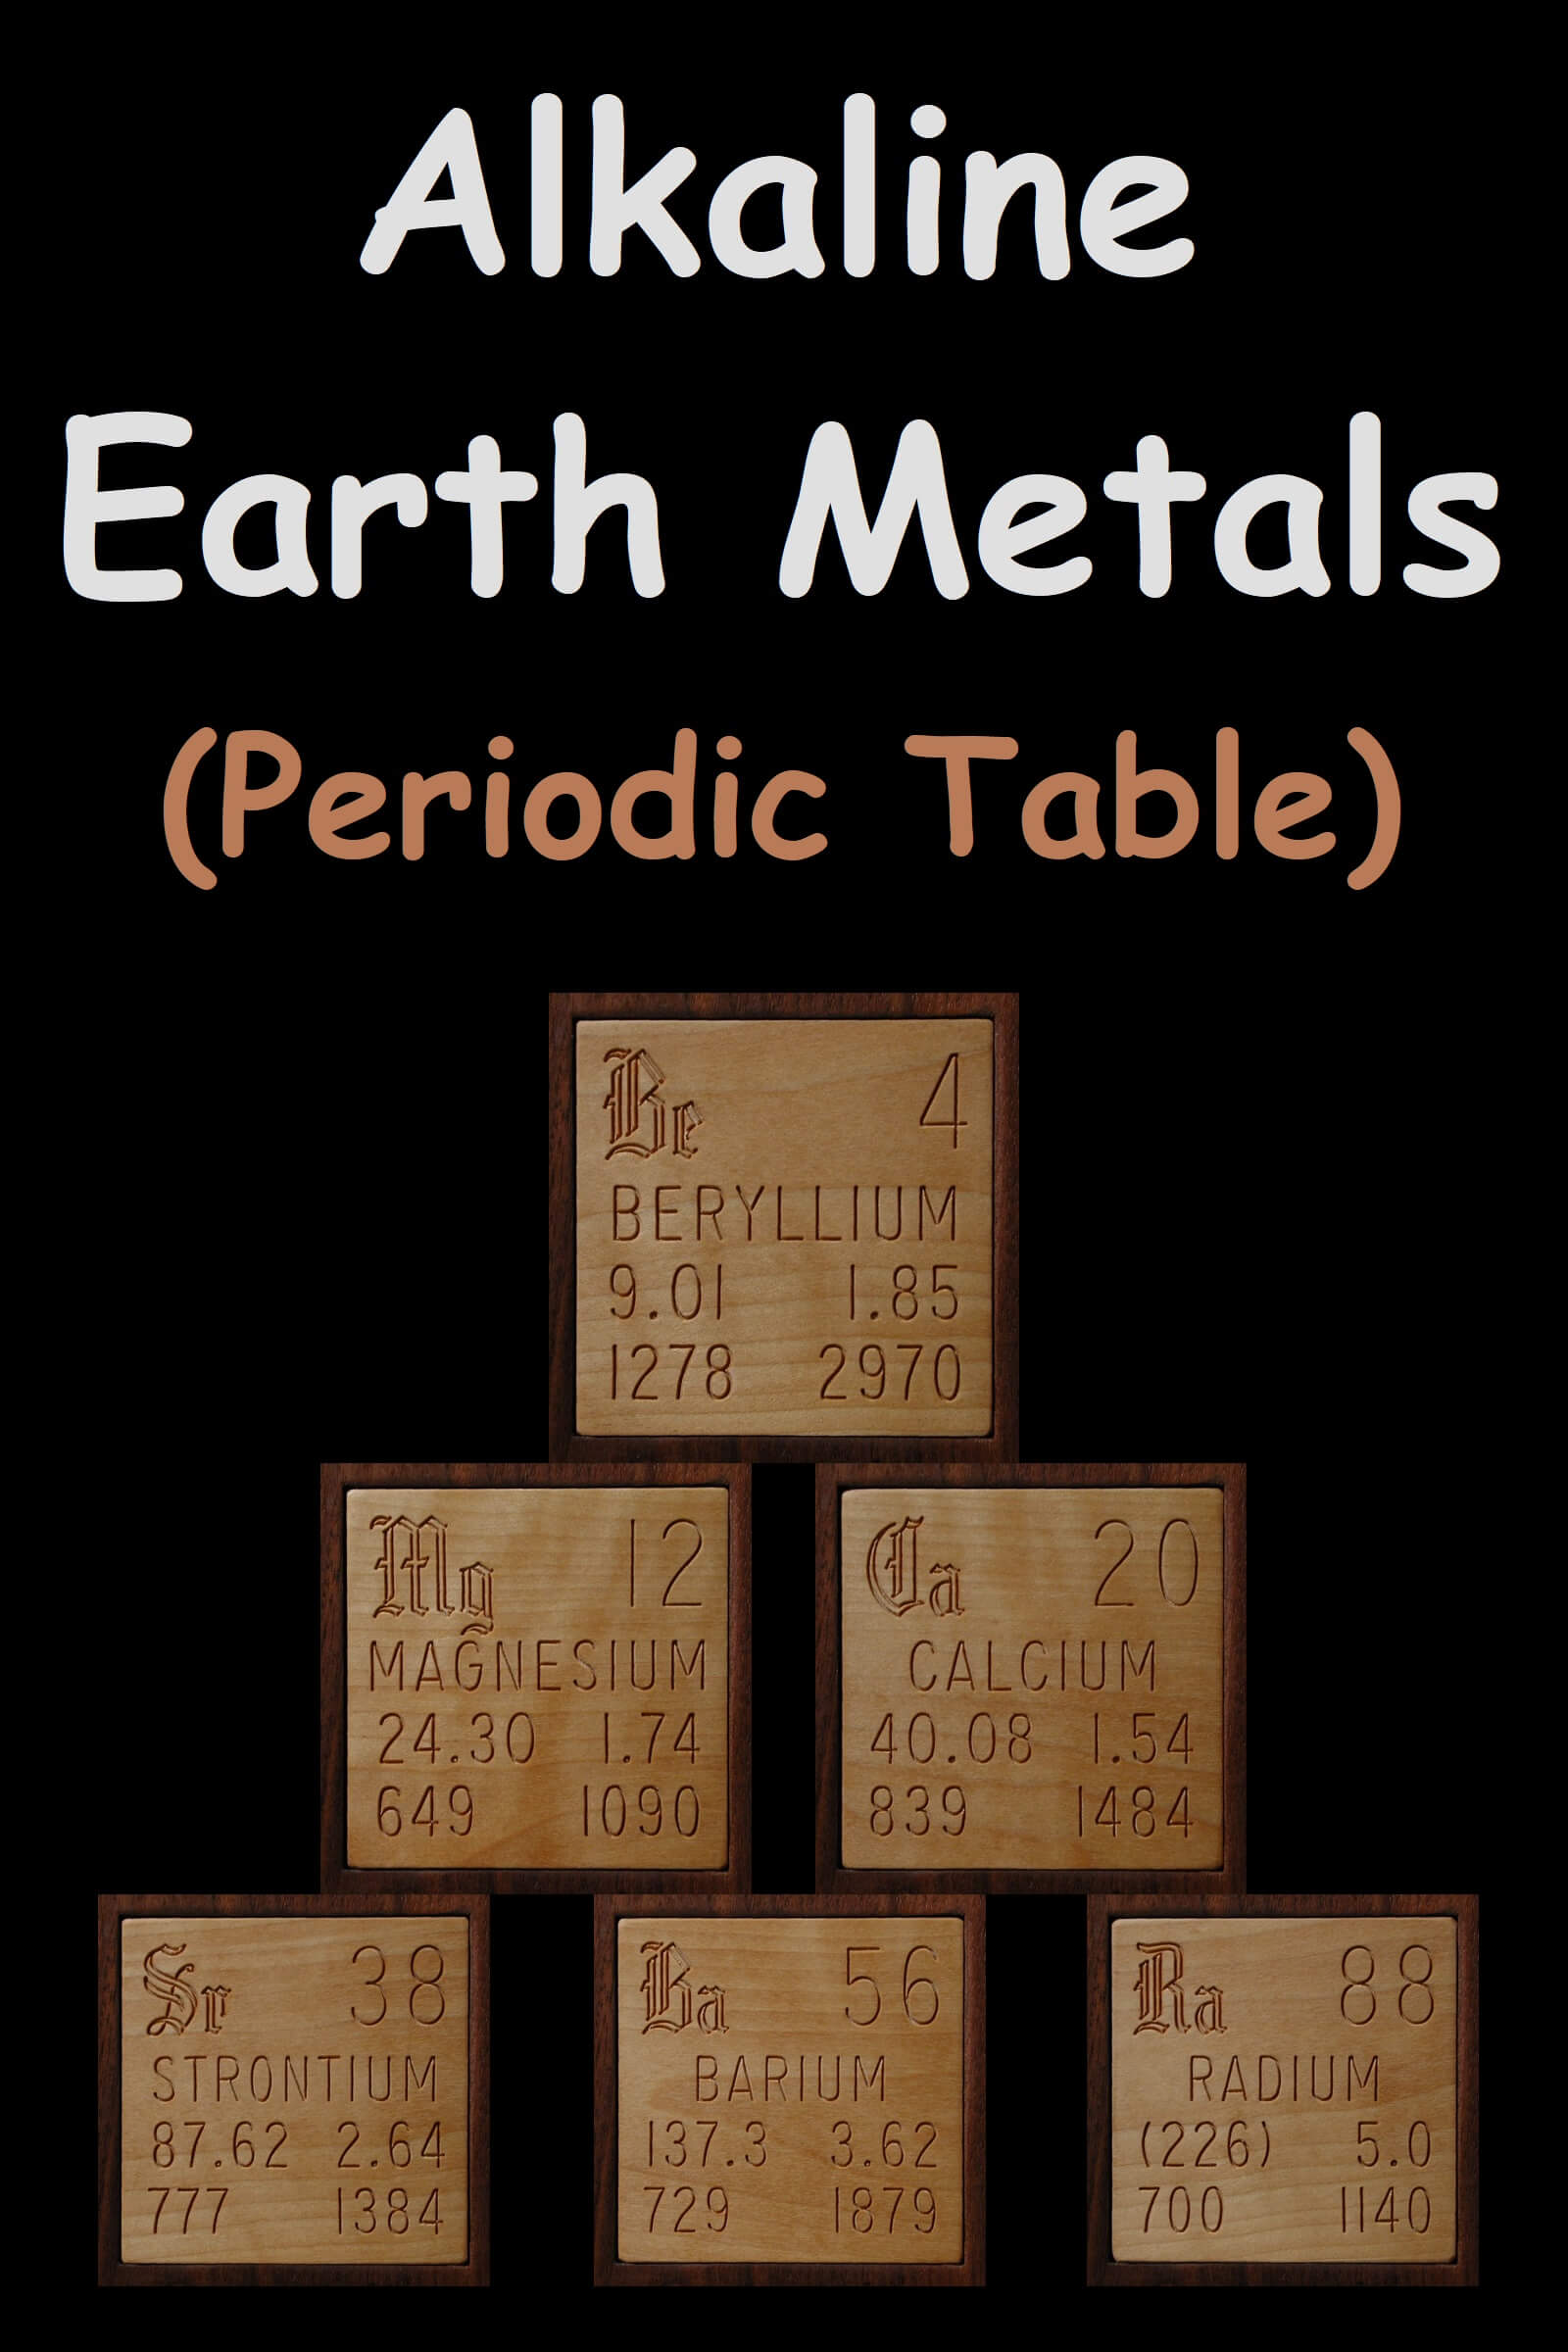 Alkaline Earth Metals On The Periodic